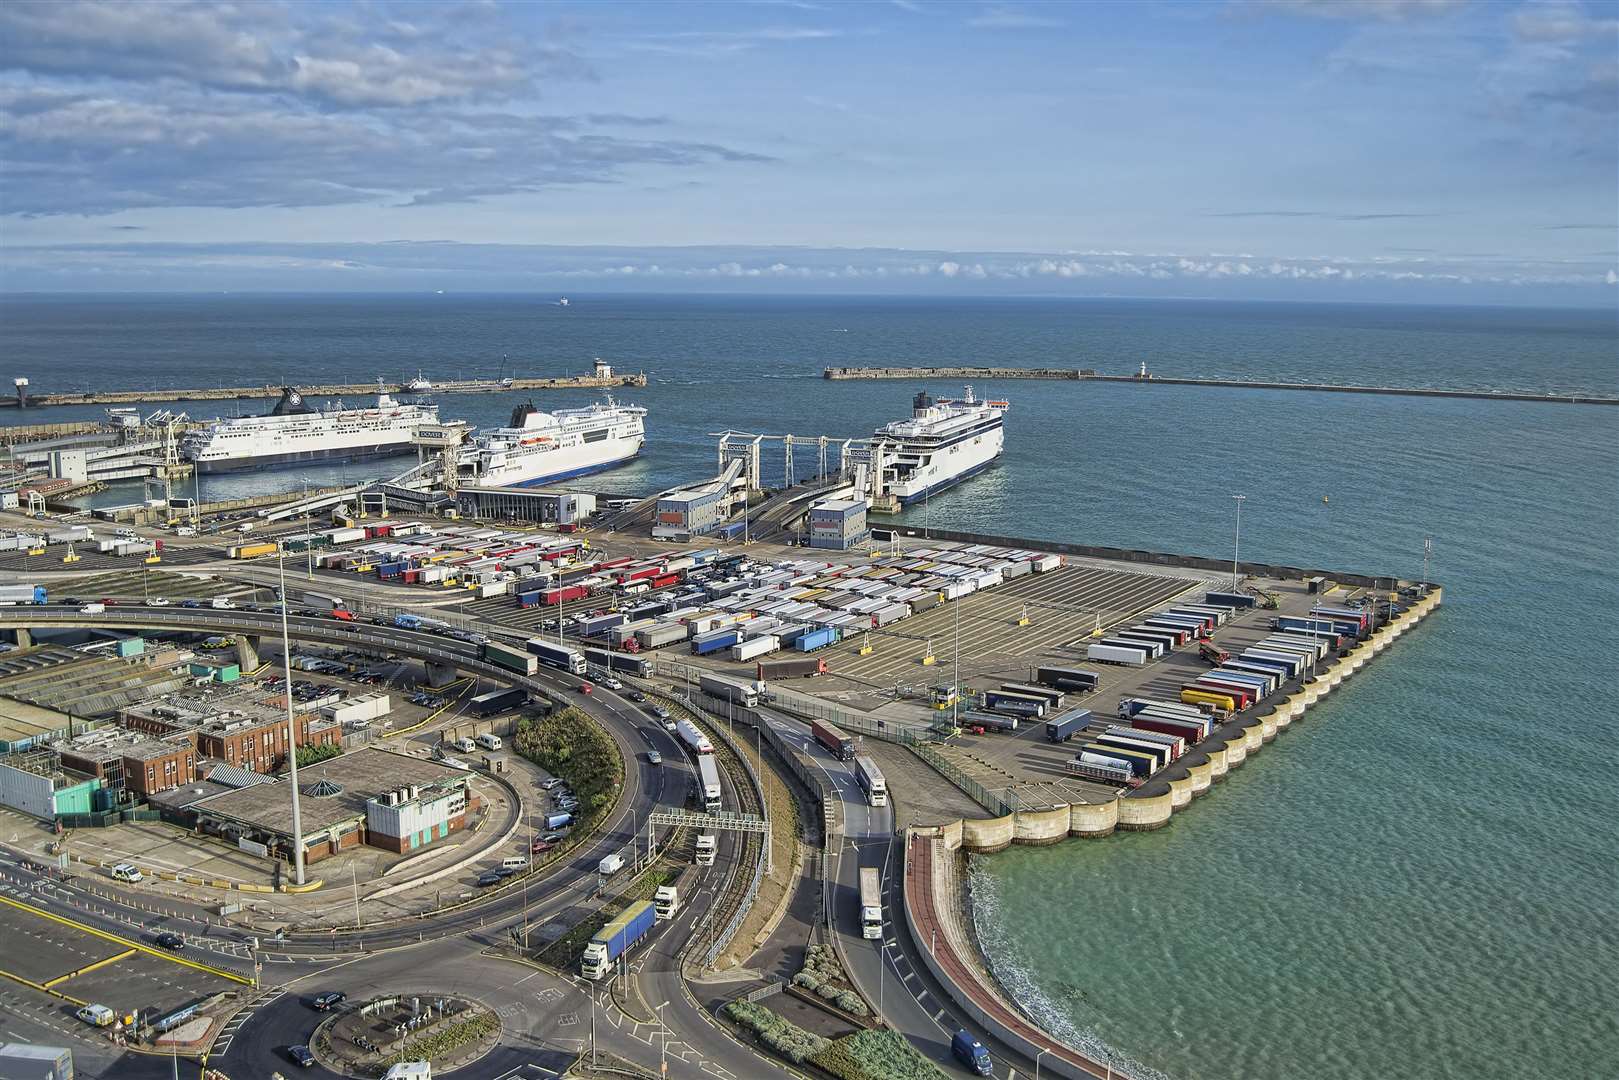 Sailings from the Port of Dover are among those affected